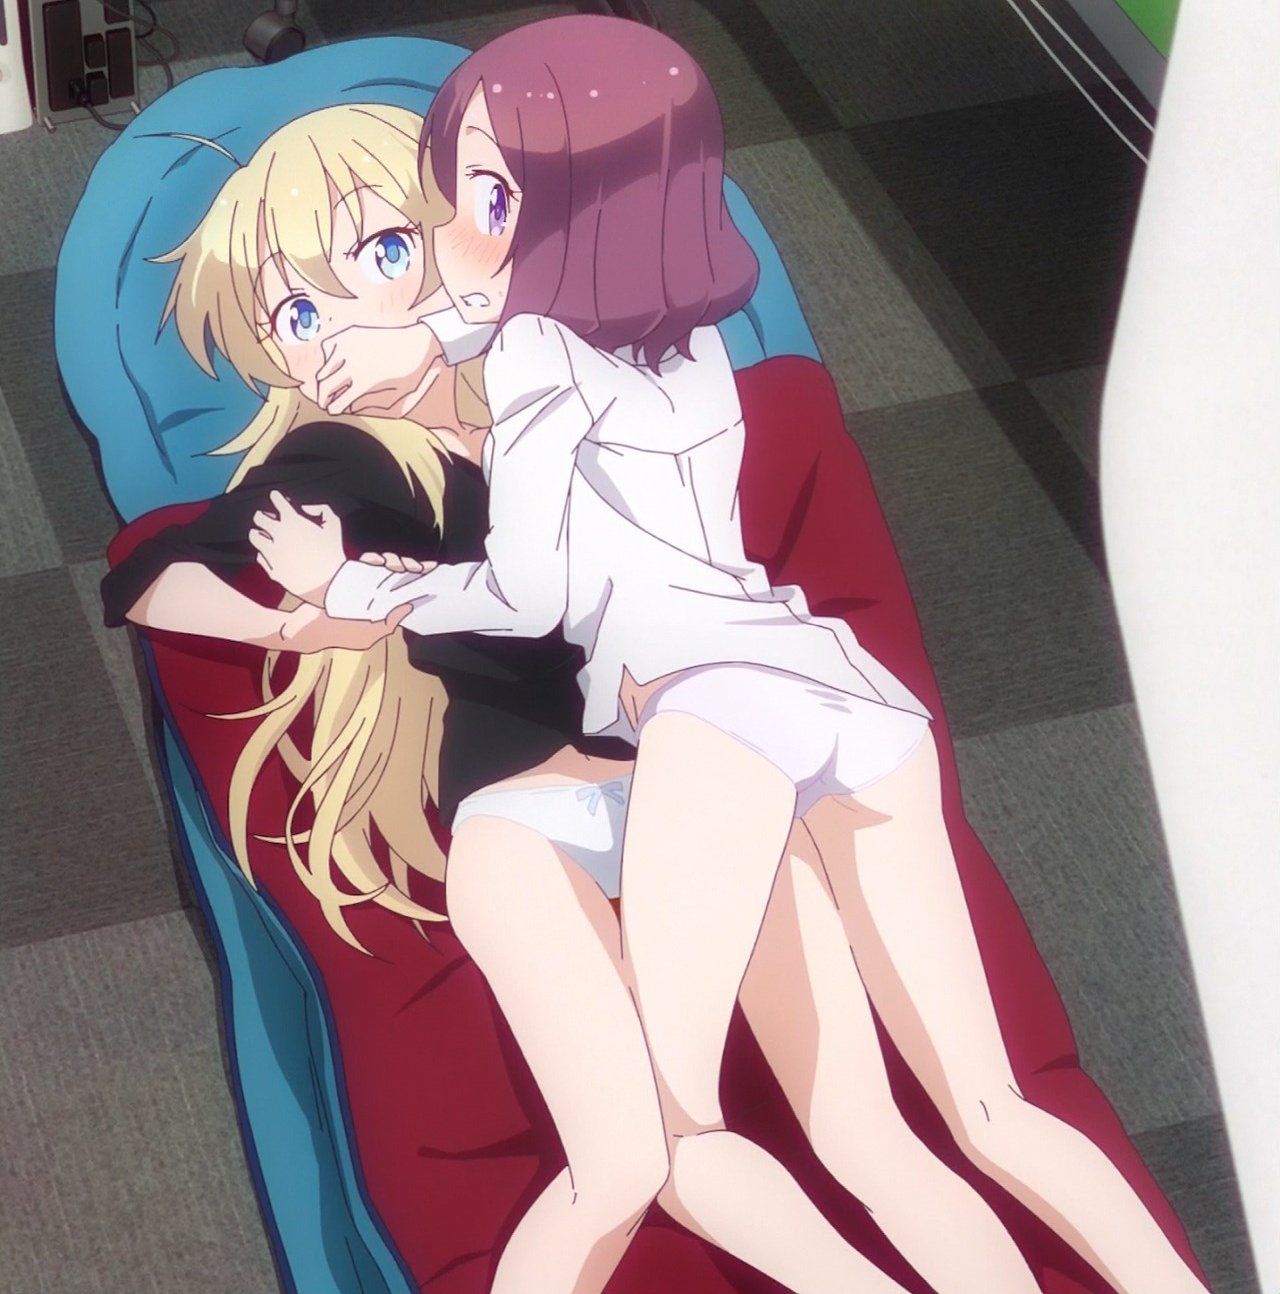 [Image is: "NEW GAME! ' Rin-Chan and コウ of coupling the optimal high wwwwwww 5